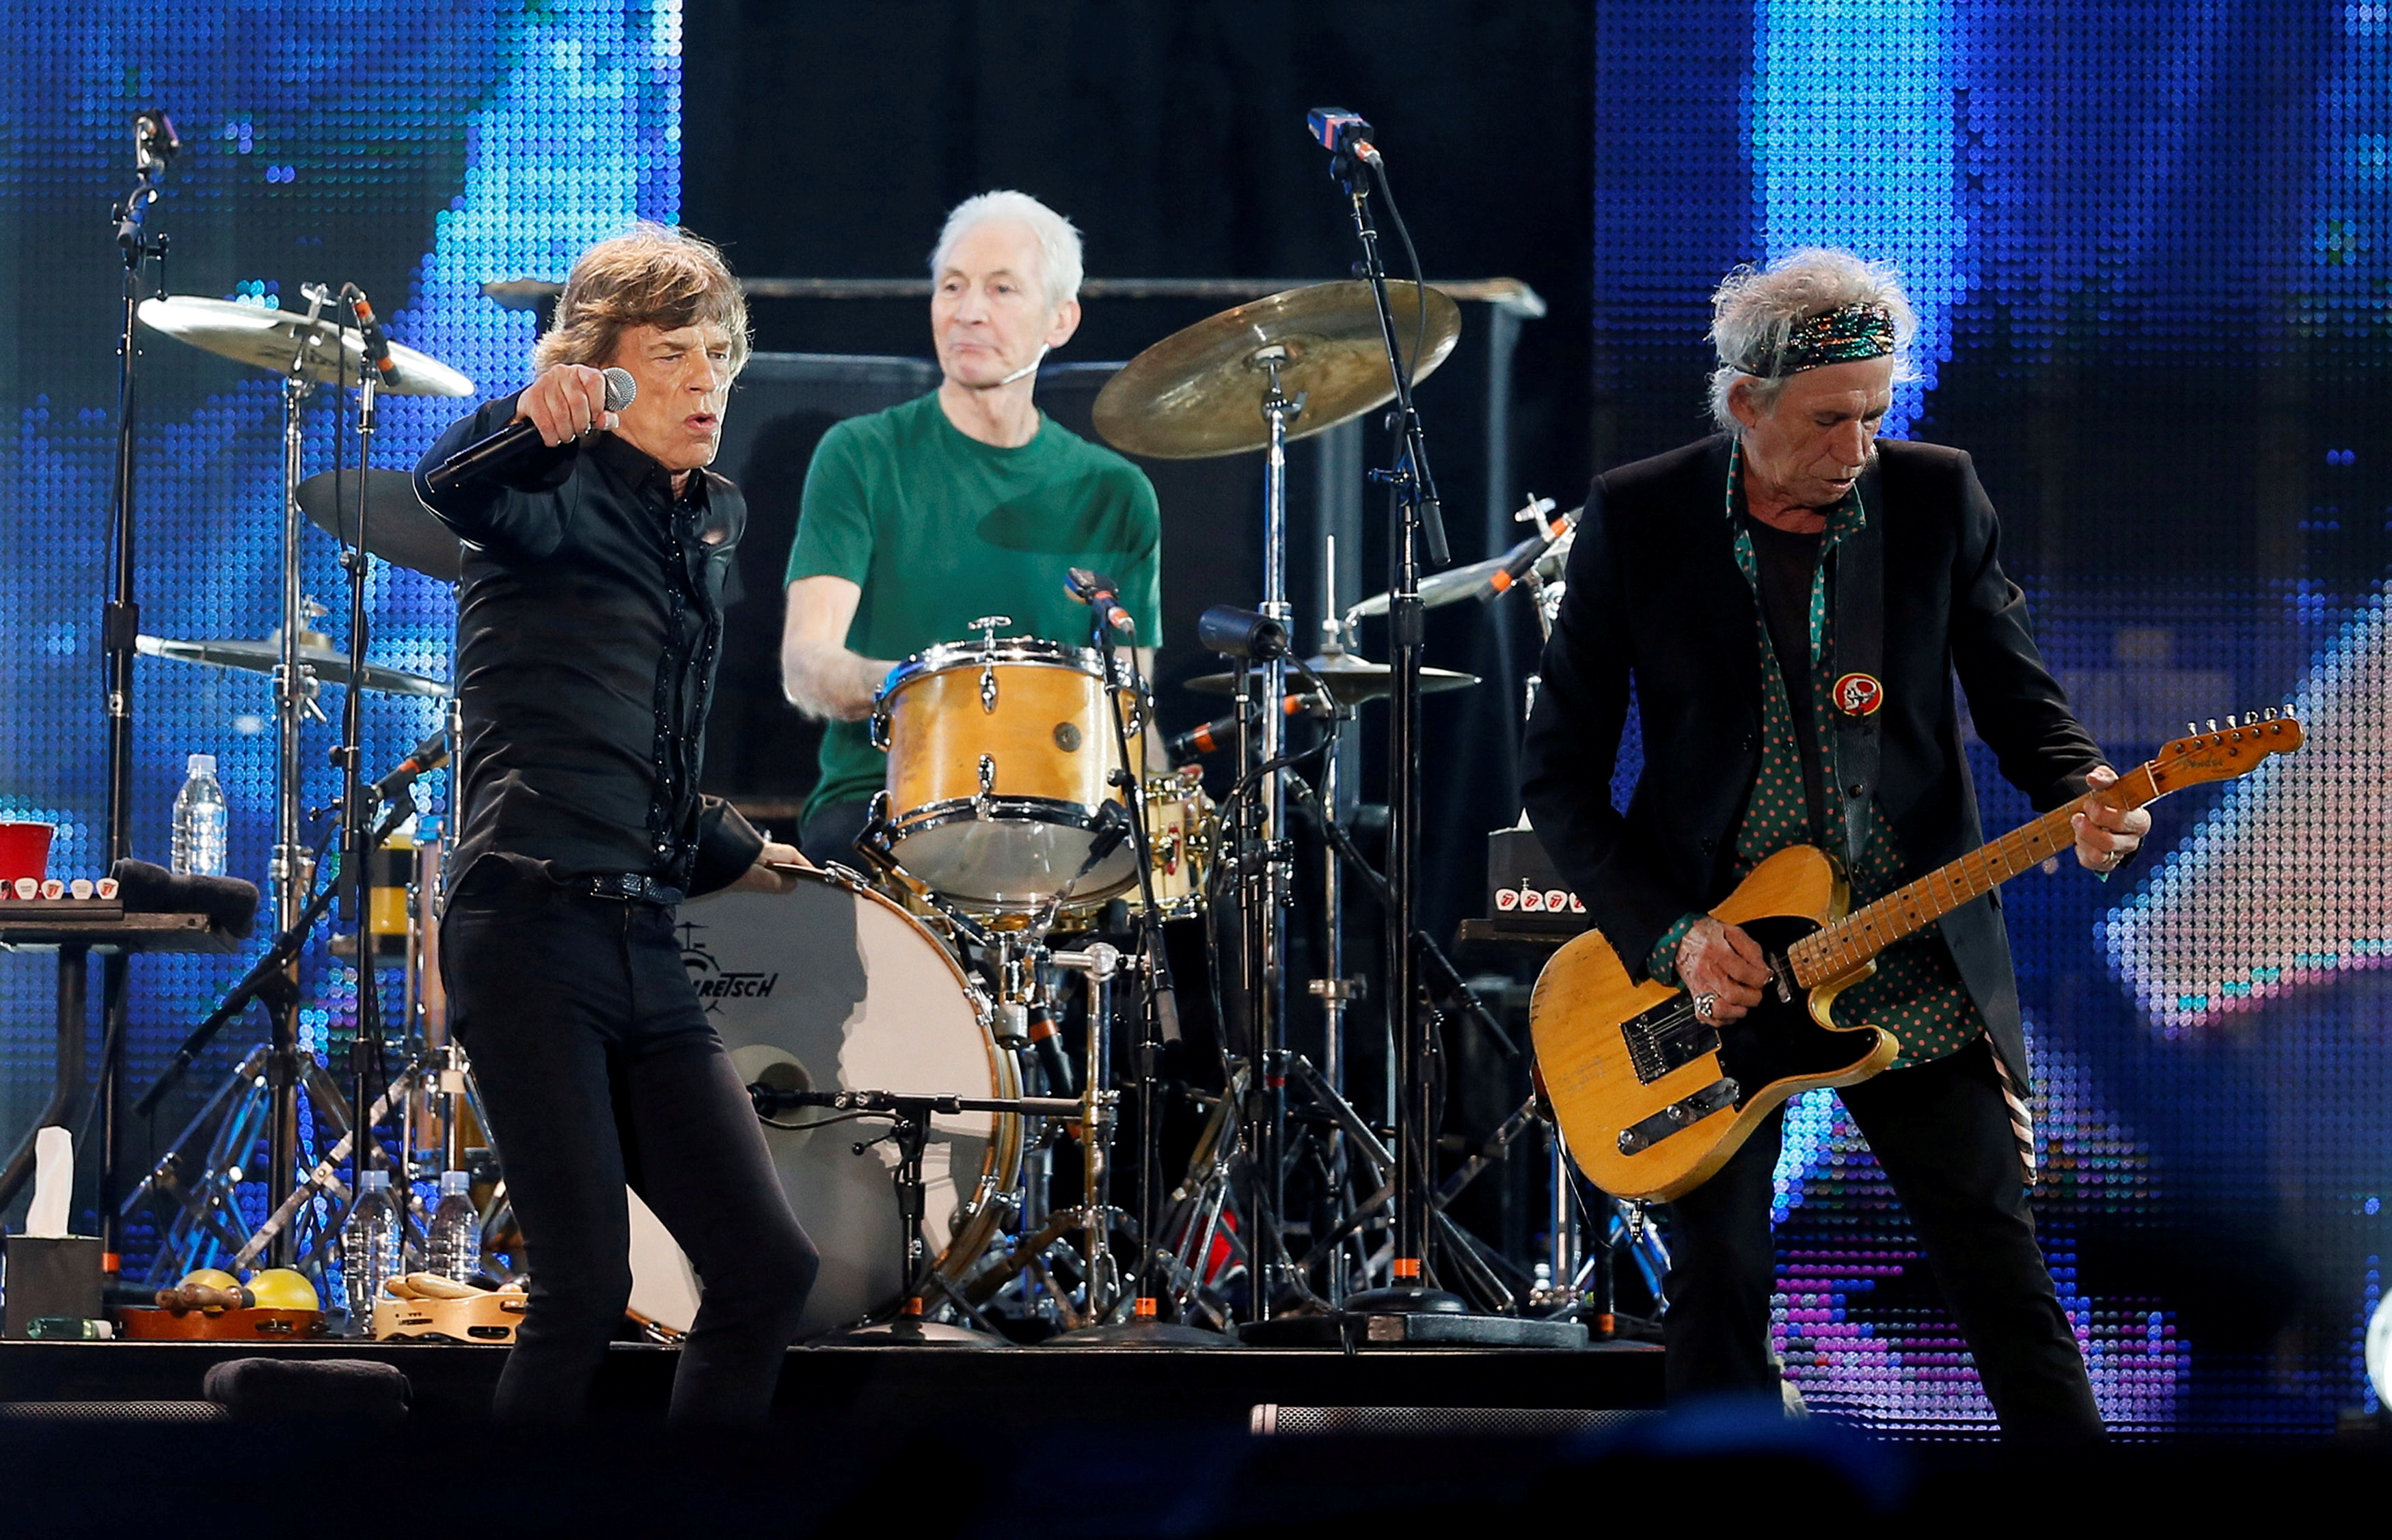 Mick Jagger, Charlie Watts and Keith Richards of the Rolling Stones perform during a concert in Abu Dhabi